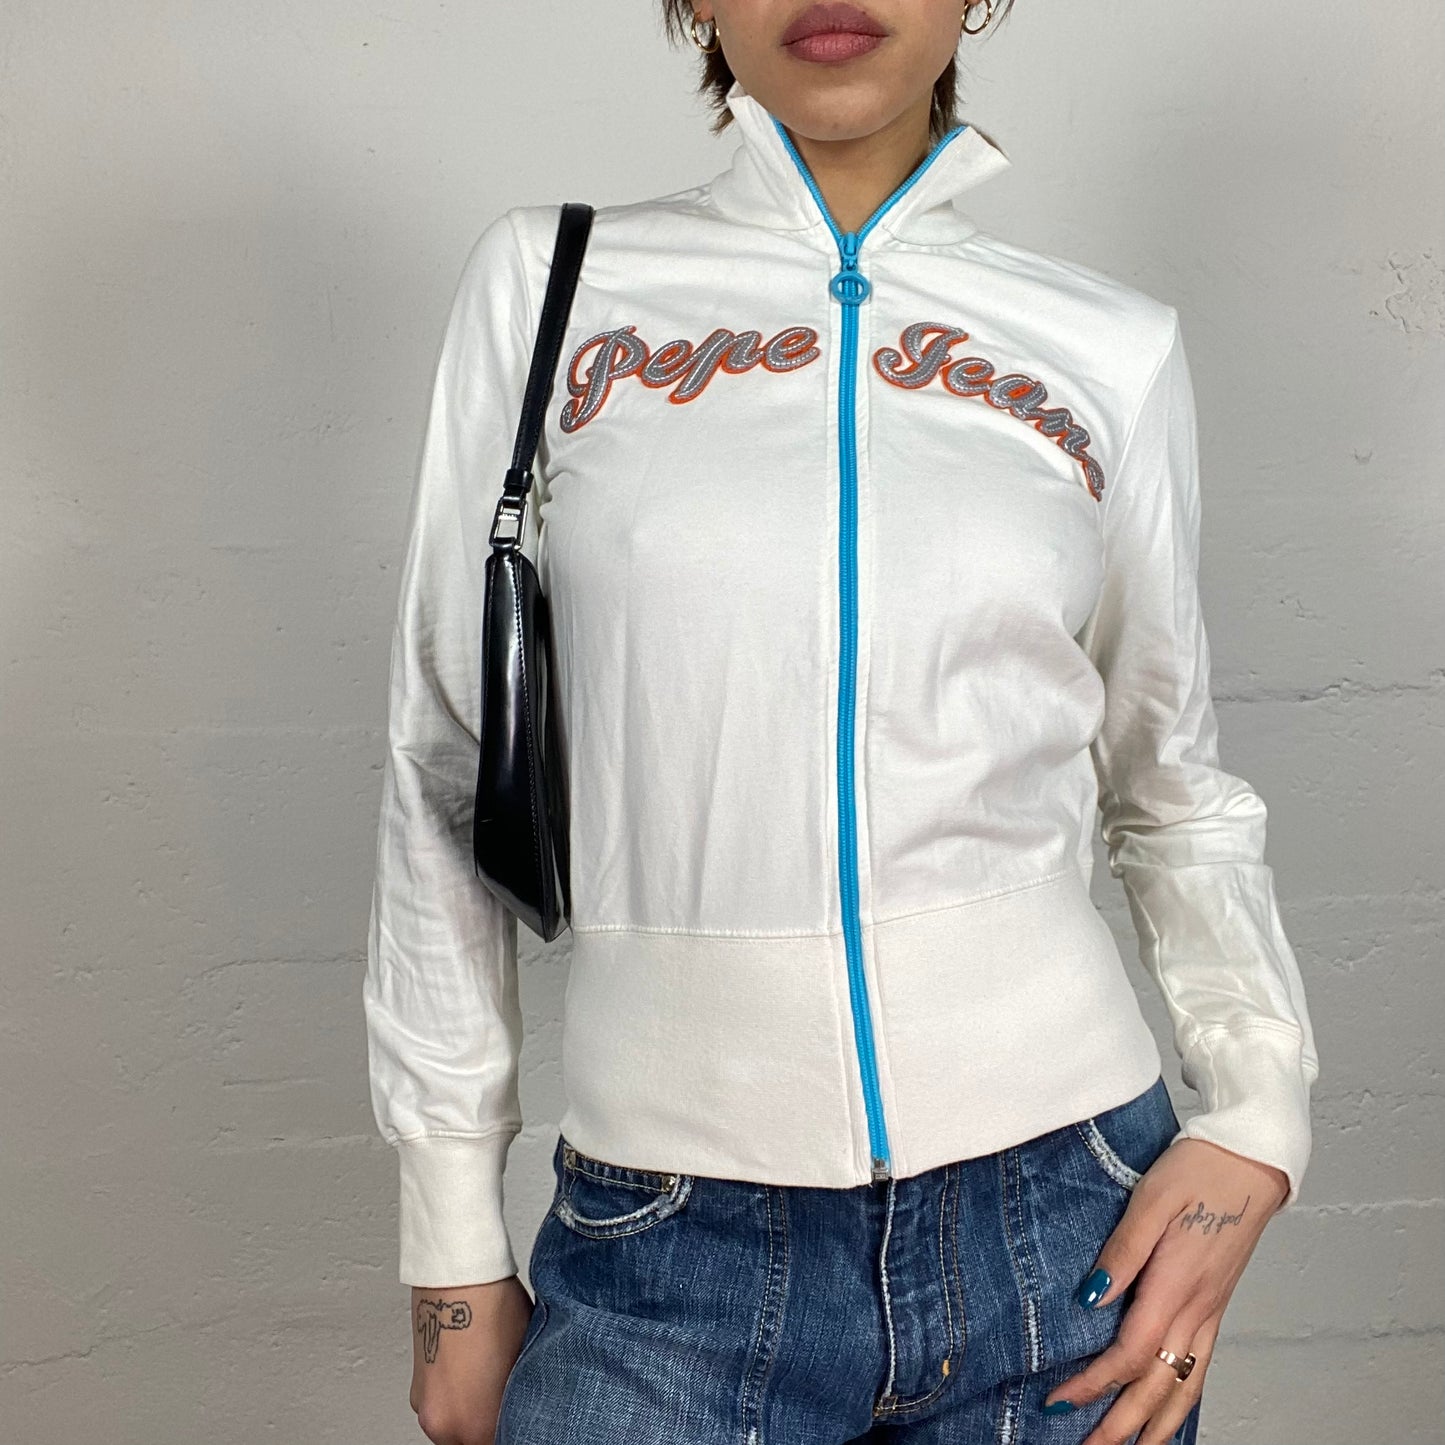 Vintage 2000's Pepe Jeans Sporty White Zip Up Sweater with Brand Name Print (S)